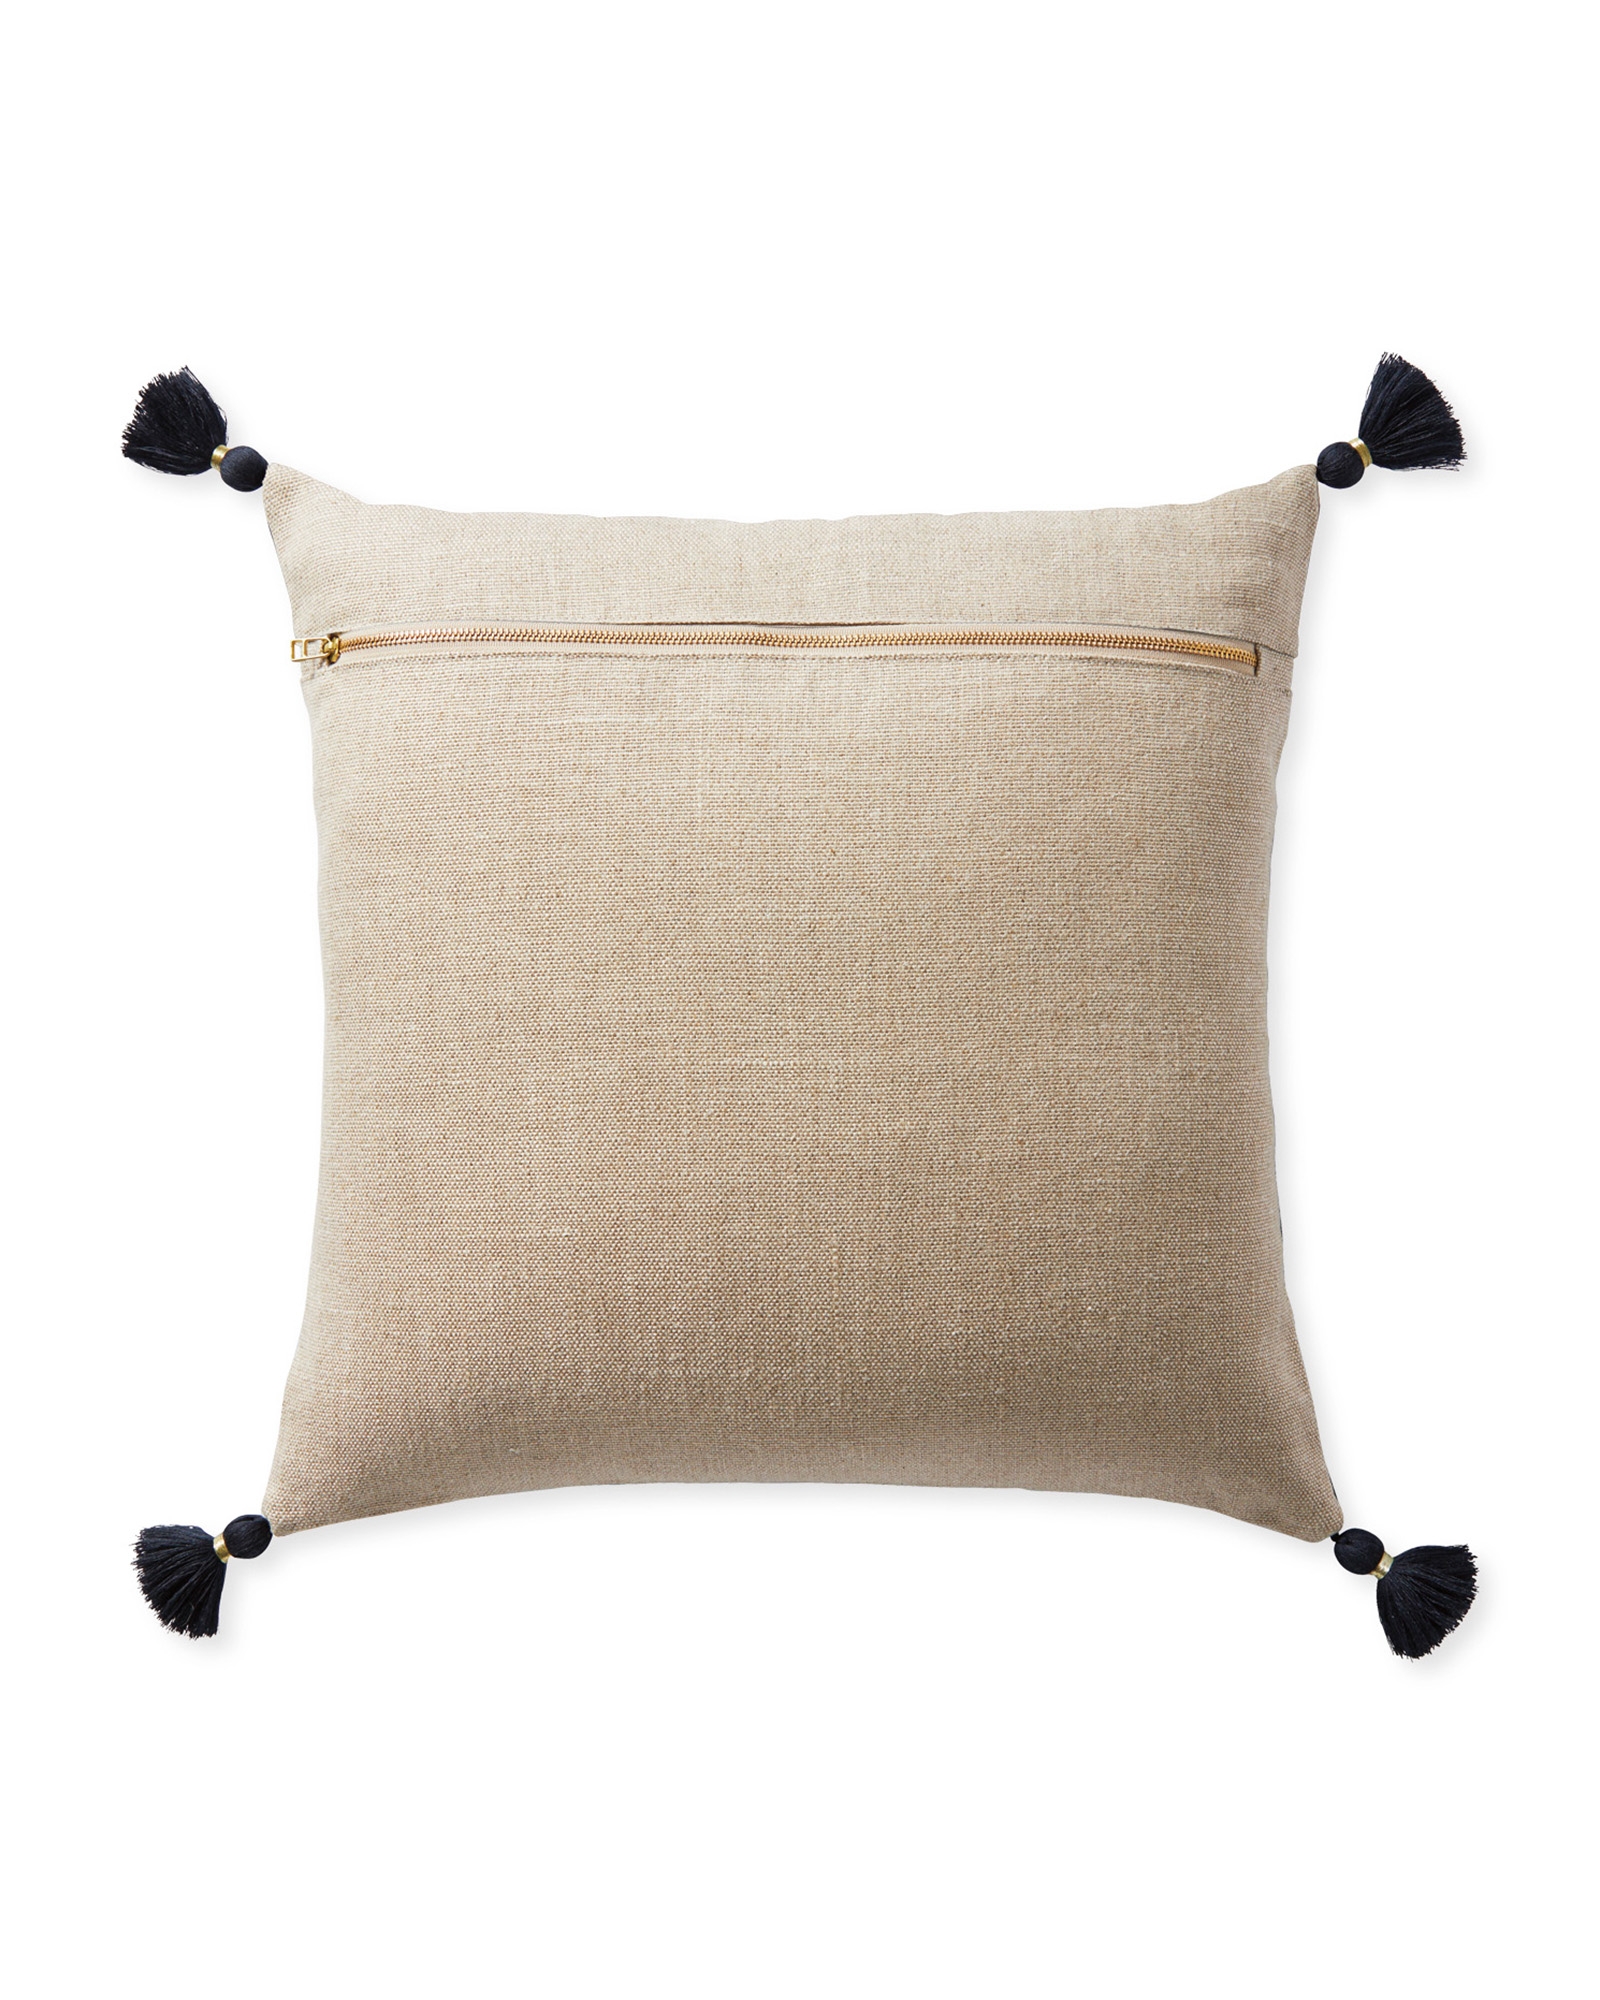 Suede Eva 20" SQ Pillow Cover - Navy - Insert sold separately - Image 1